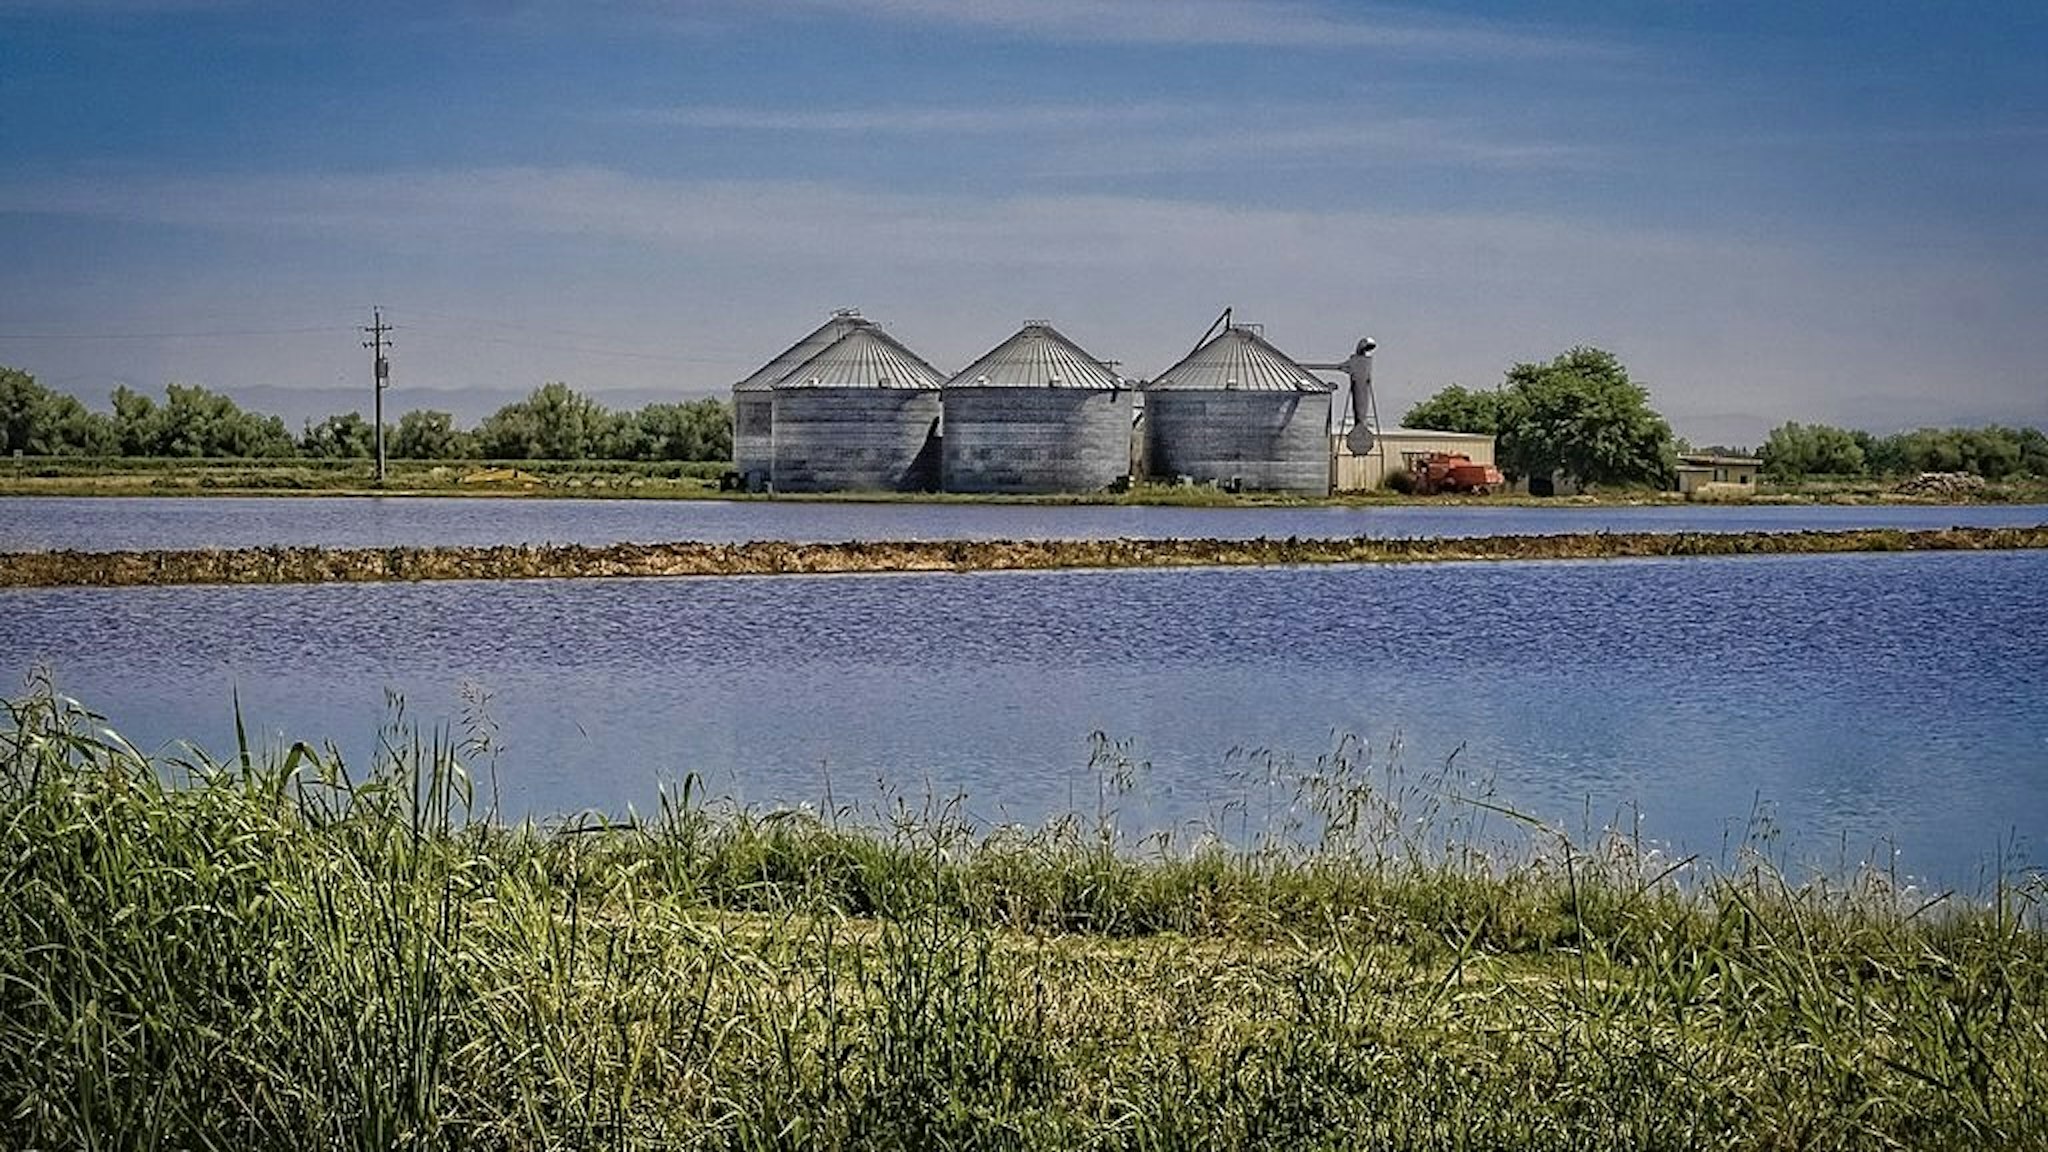 Agriculture Tech Silos next to flooded rice paddies, Sacramento Valley, California. Mardis Coers / Contributor via Getty Images